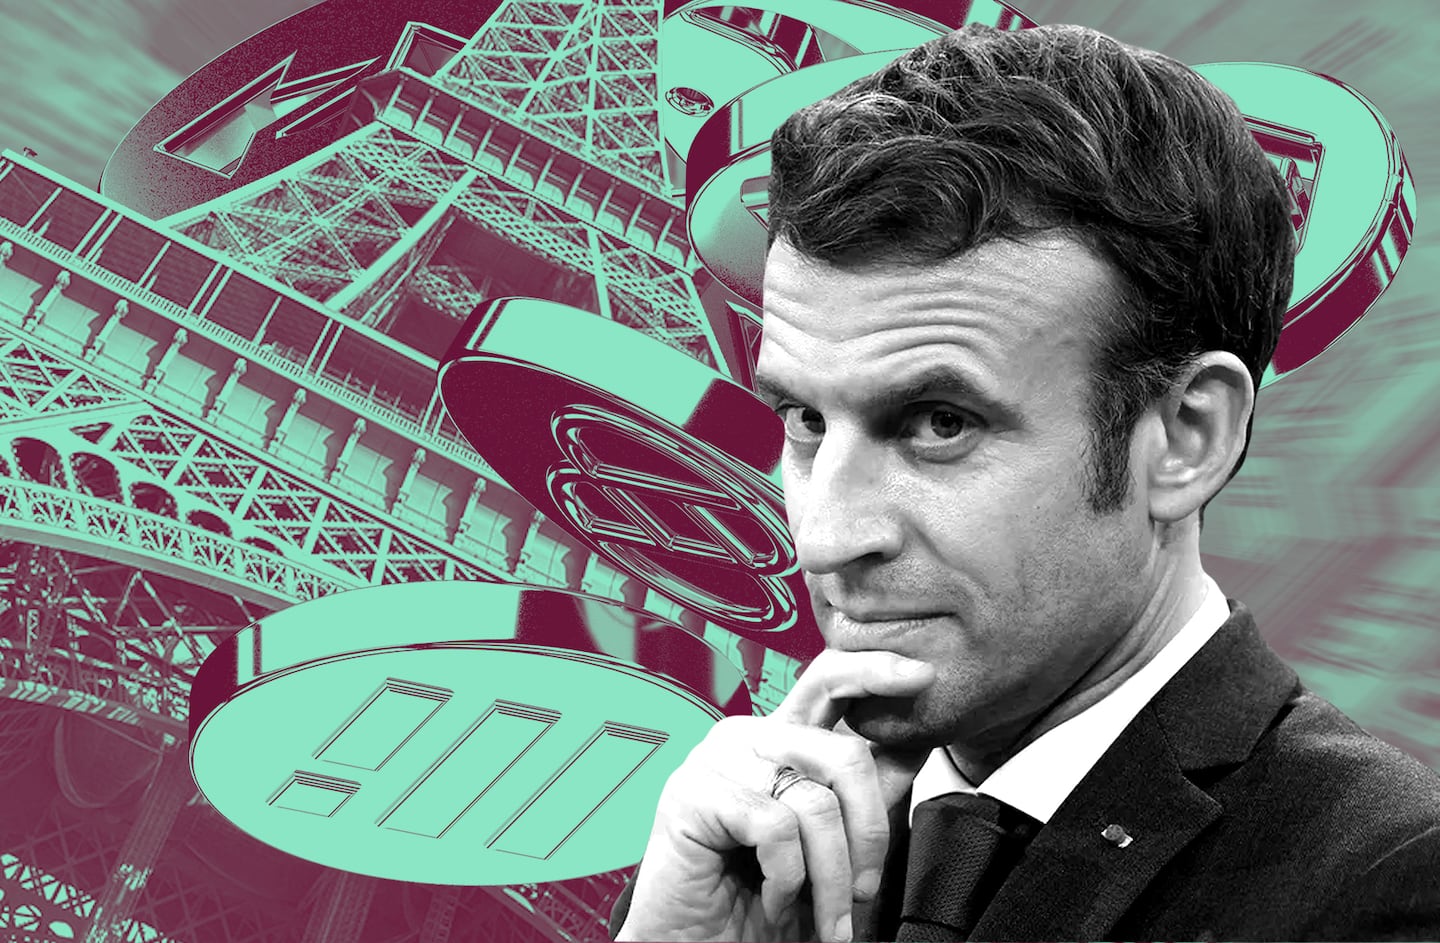 Portrait of Emmanuel Macron with the Eiffel Tower in the background with tokens flying around.